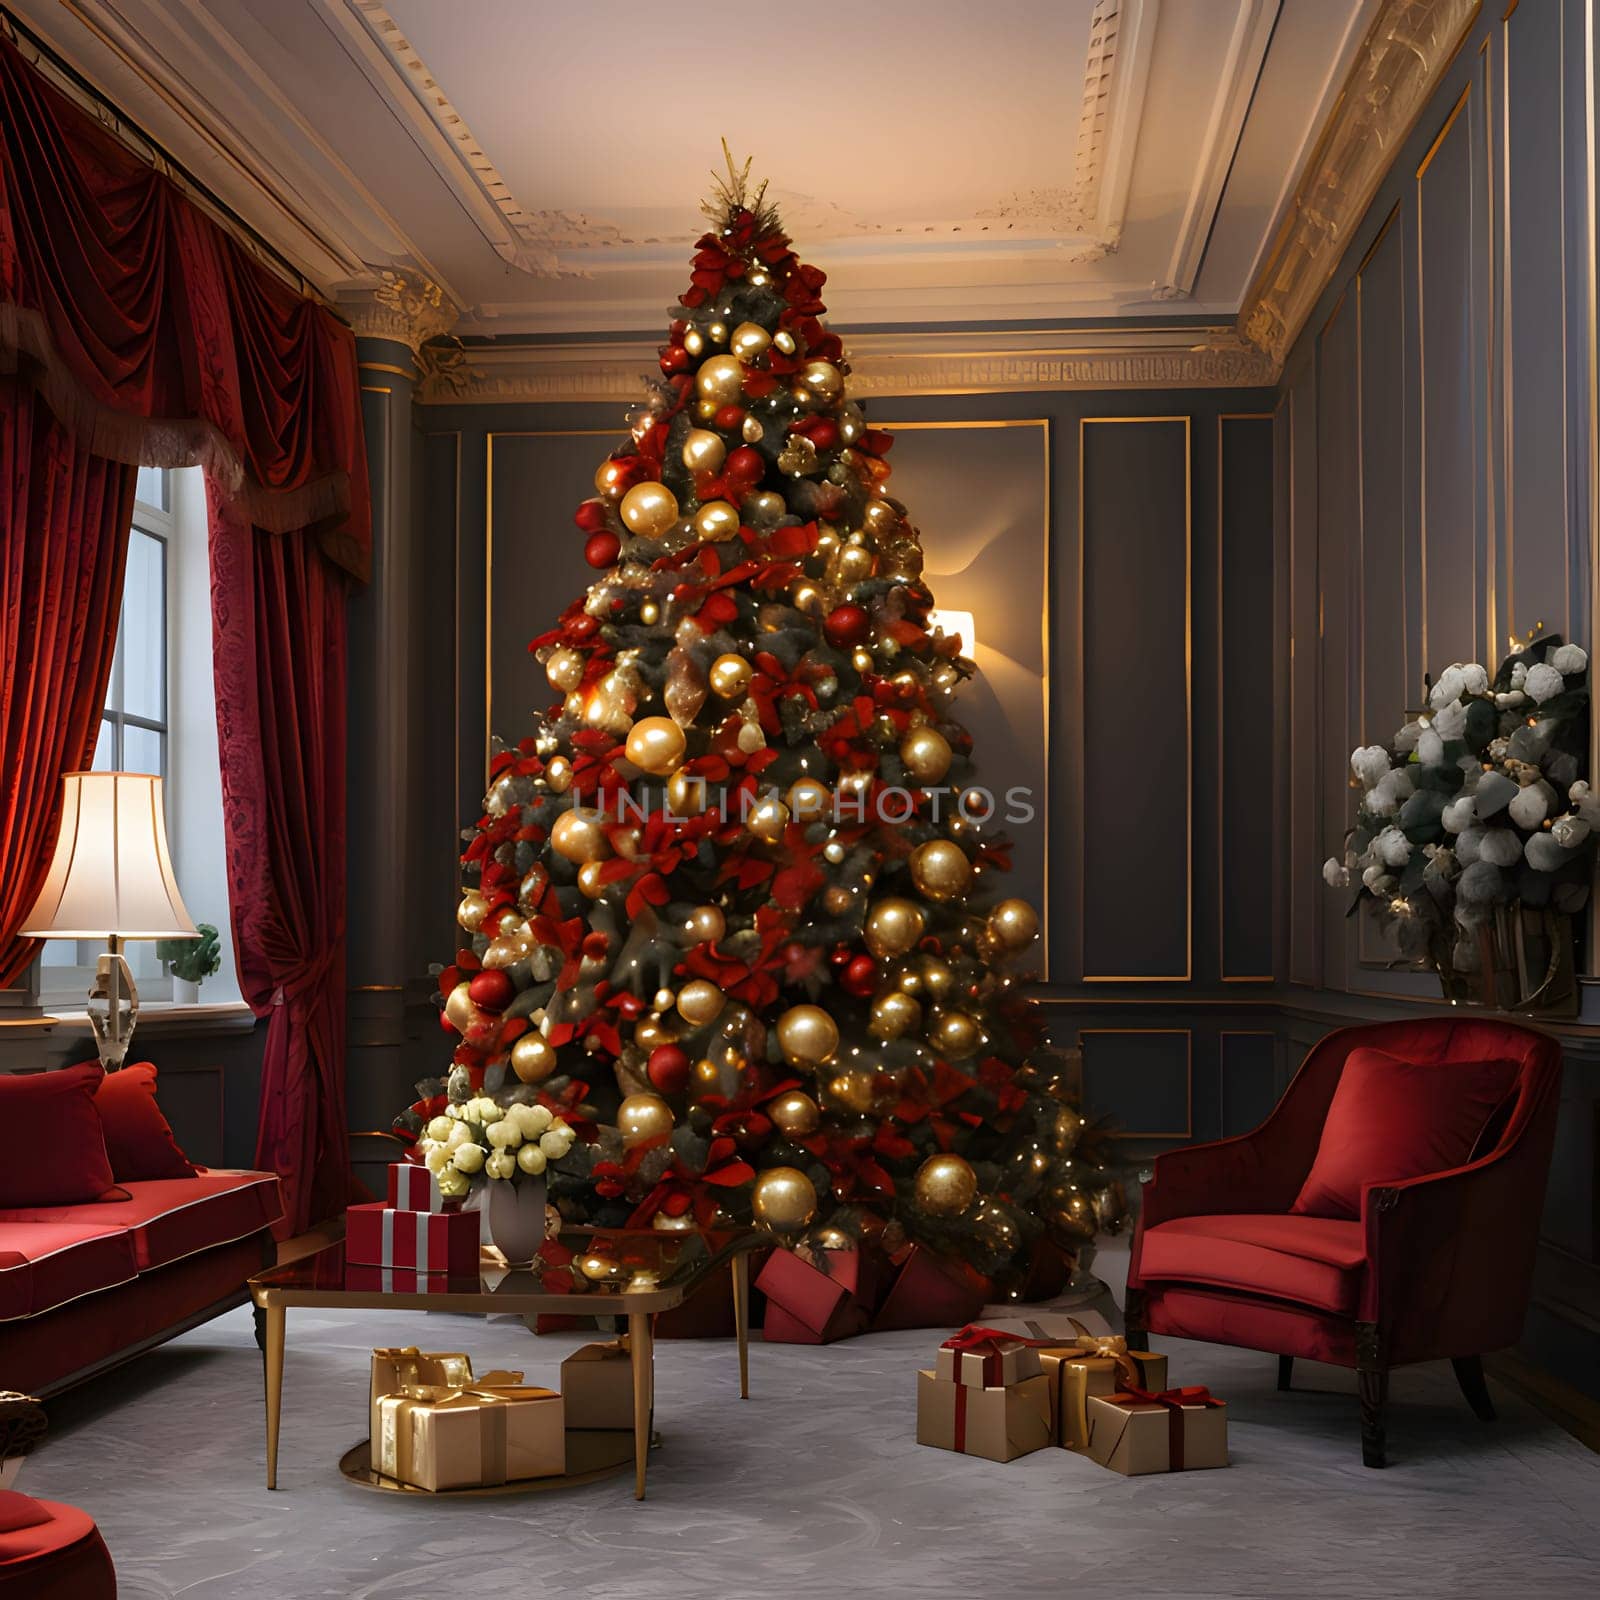 Christmas tree with gold baubles, Red Bows in a rich house, gifts all around. Xmas tree as a symbol of Christmas of the birth of the Savior. A time of joy and celebration.